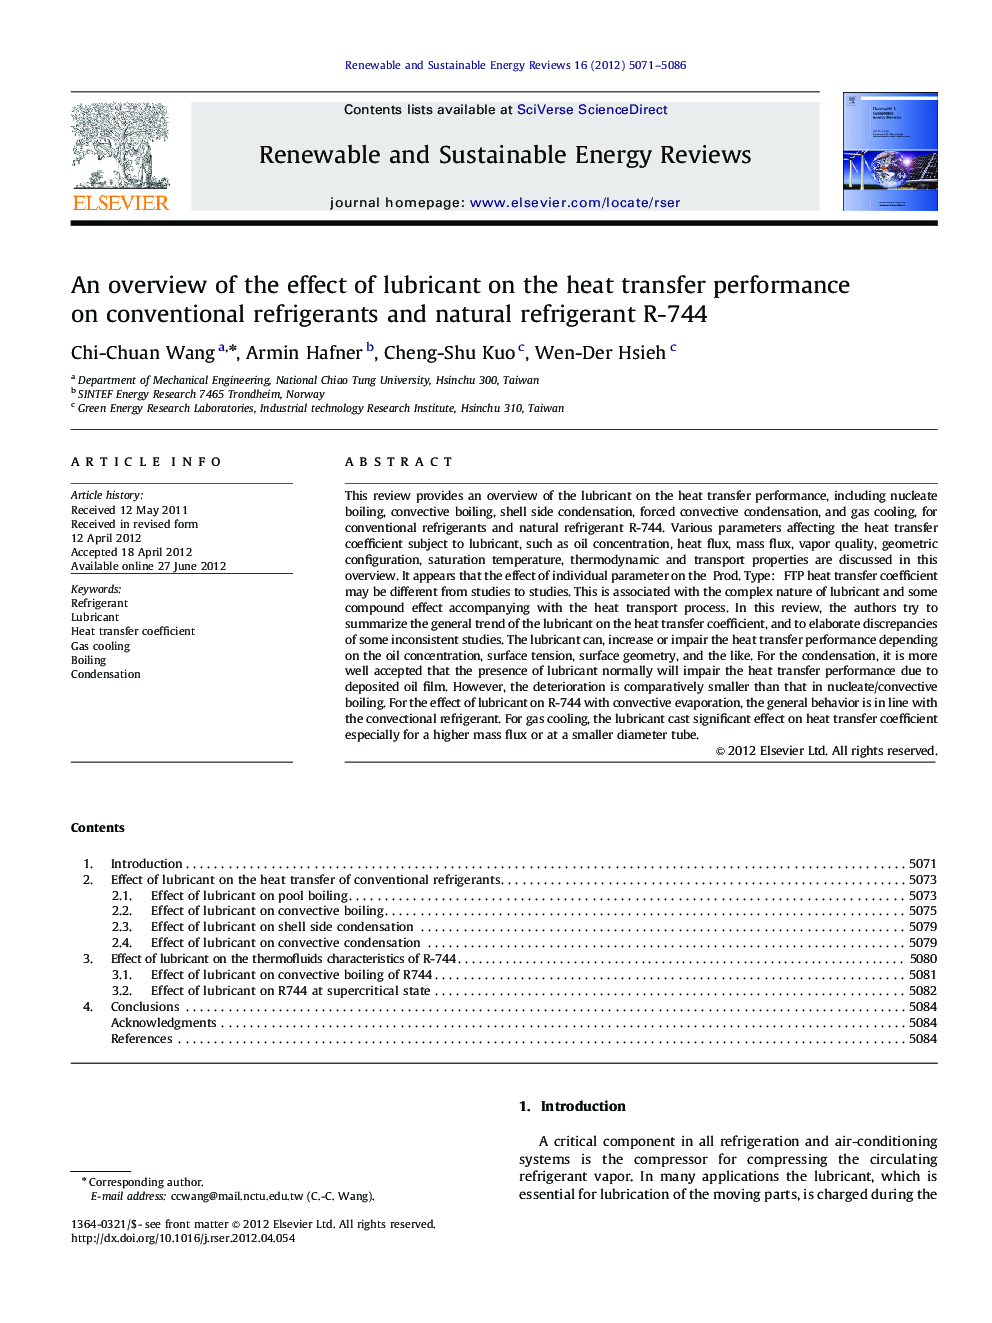 An overview of the effect of lubricant on the heat transfer performance on conventional refrigerants and natural refrigerant R-744